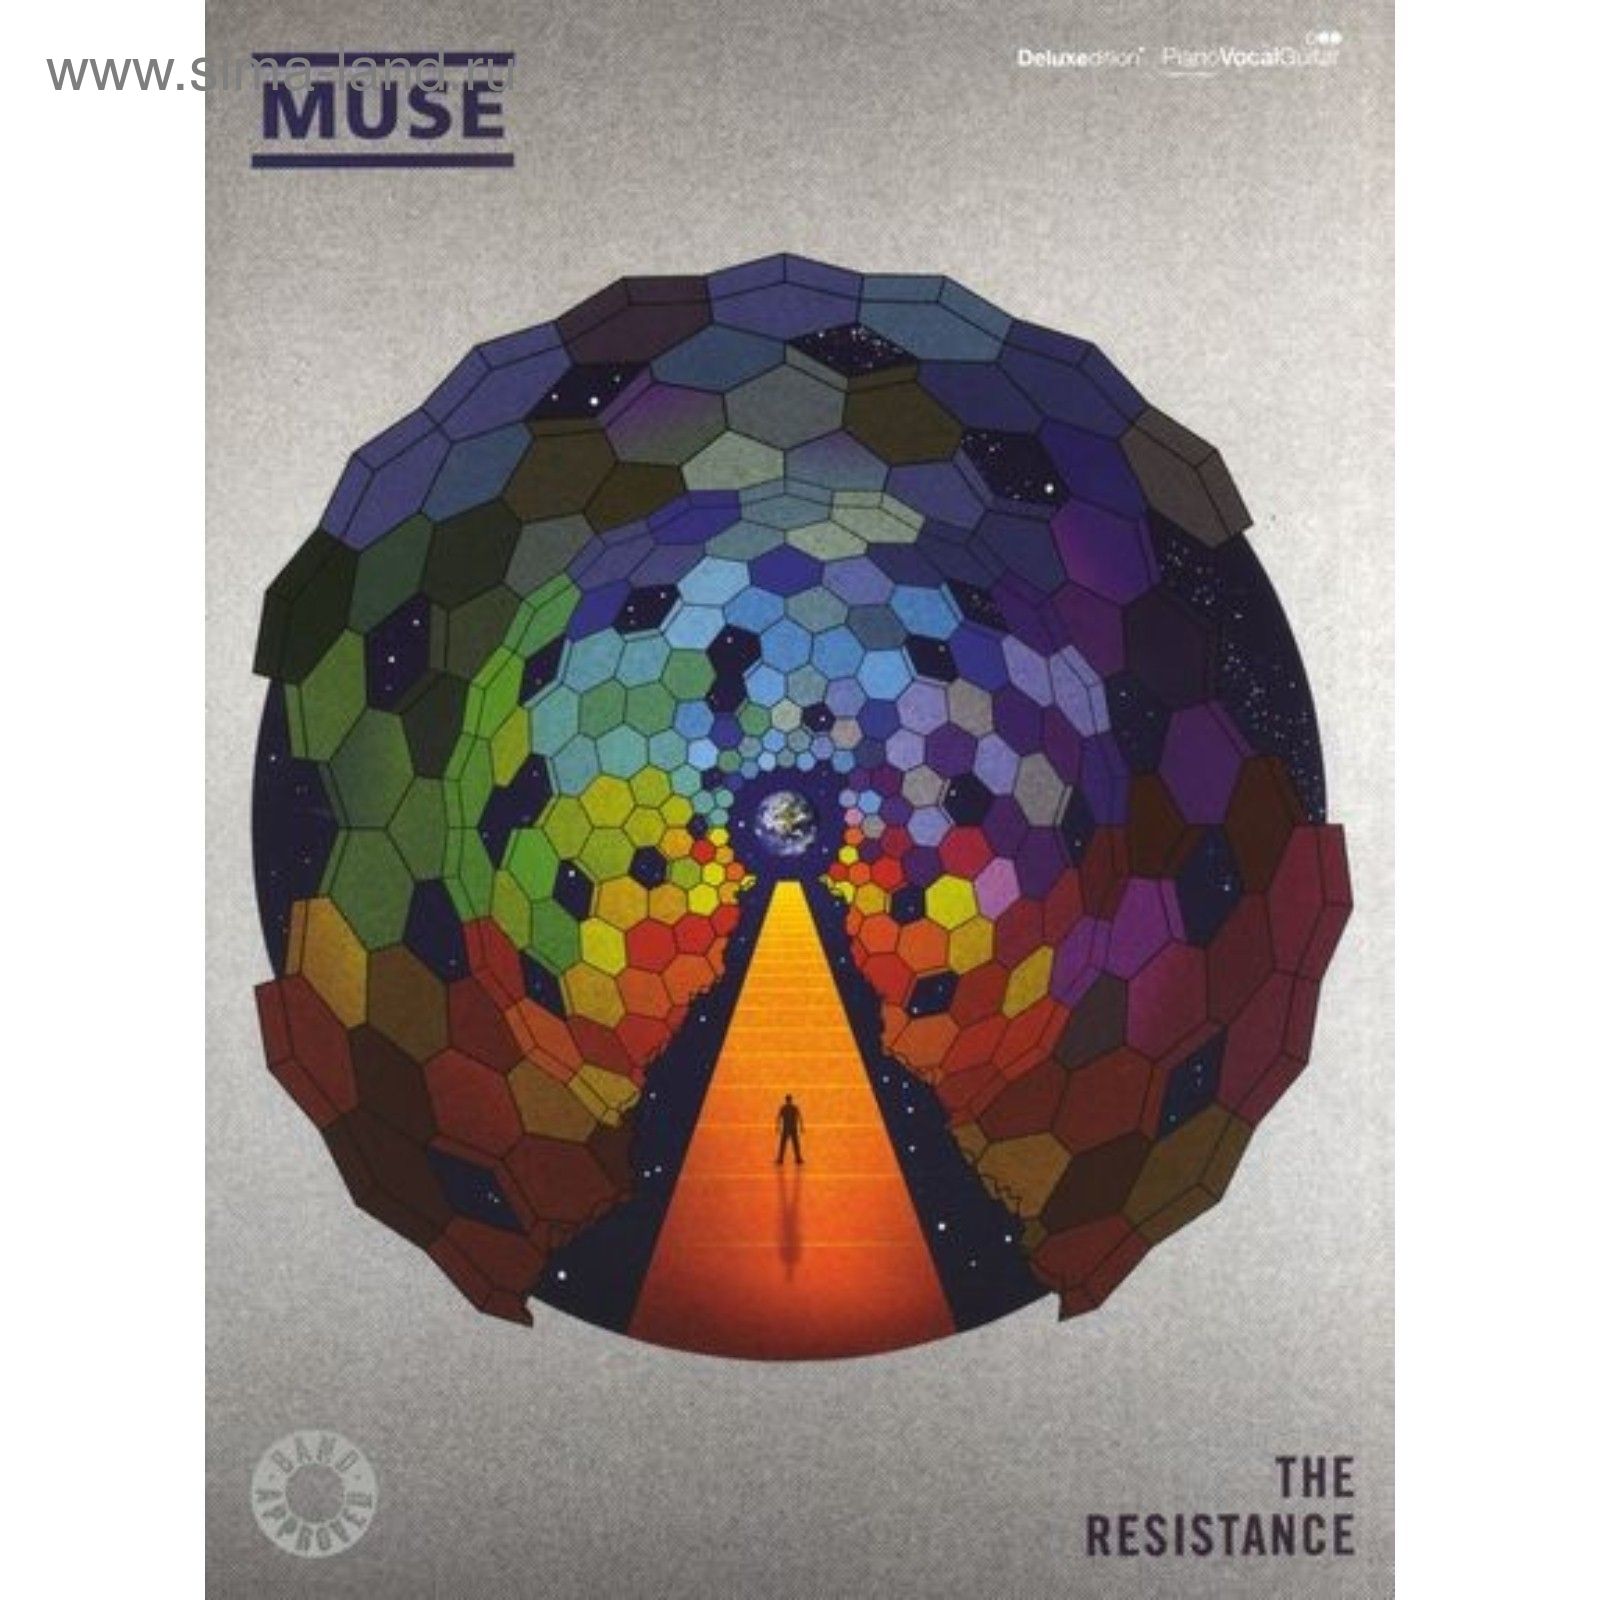 Muse undisclosed desires. Muse Resistance обложка. Постер Muse - the Resistance. CD Muse: the Resistance. Обложки музыкальных альбомов.